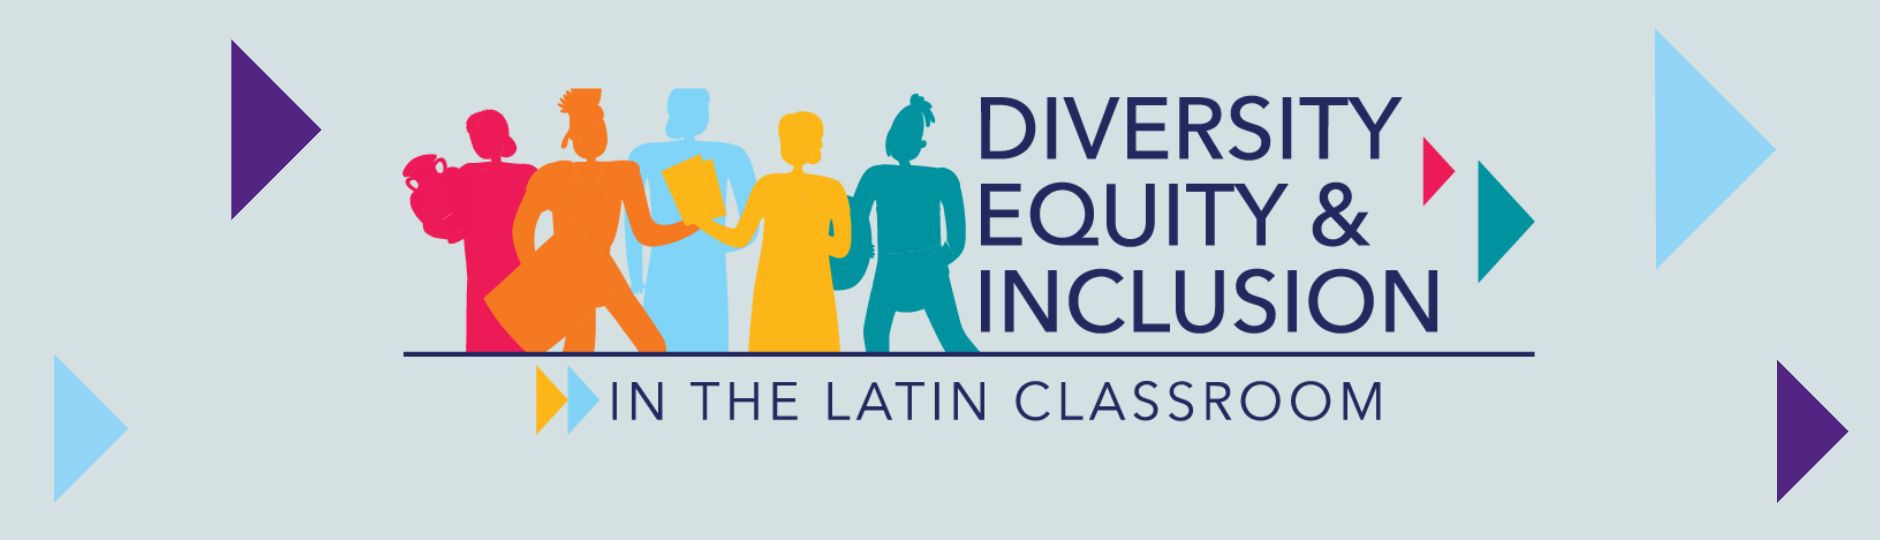 Diversity and Inclusion in the Latin Classroom